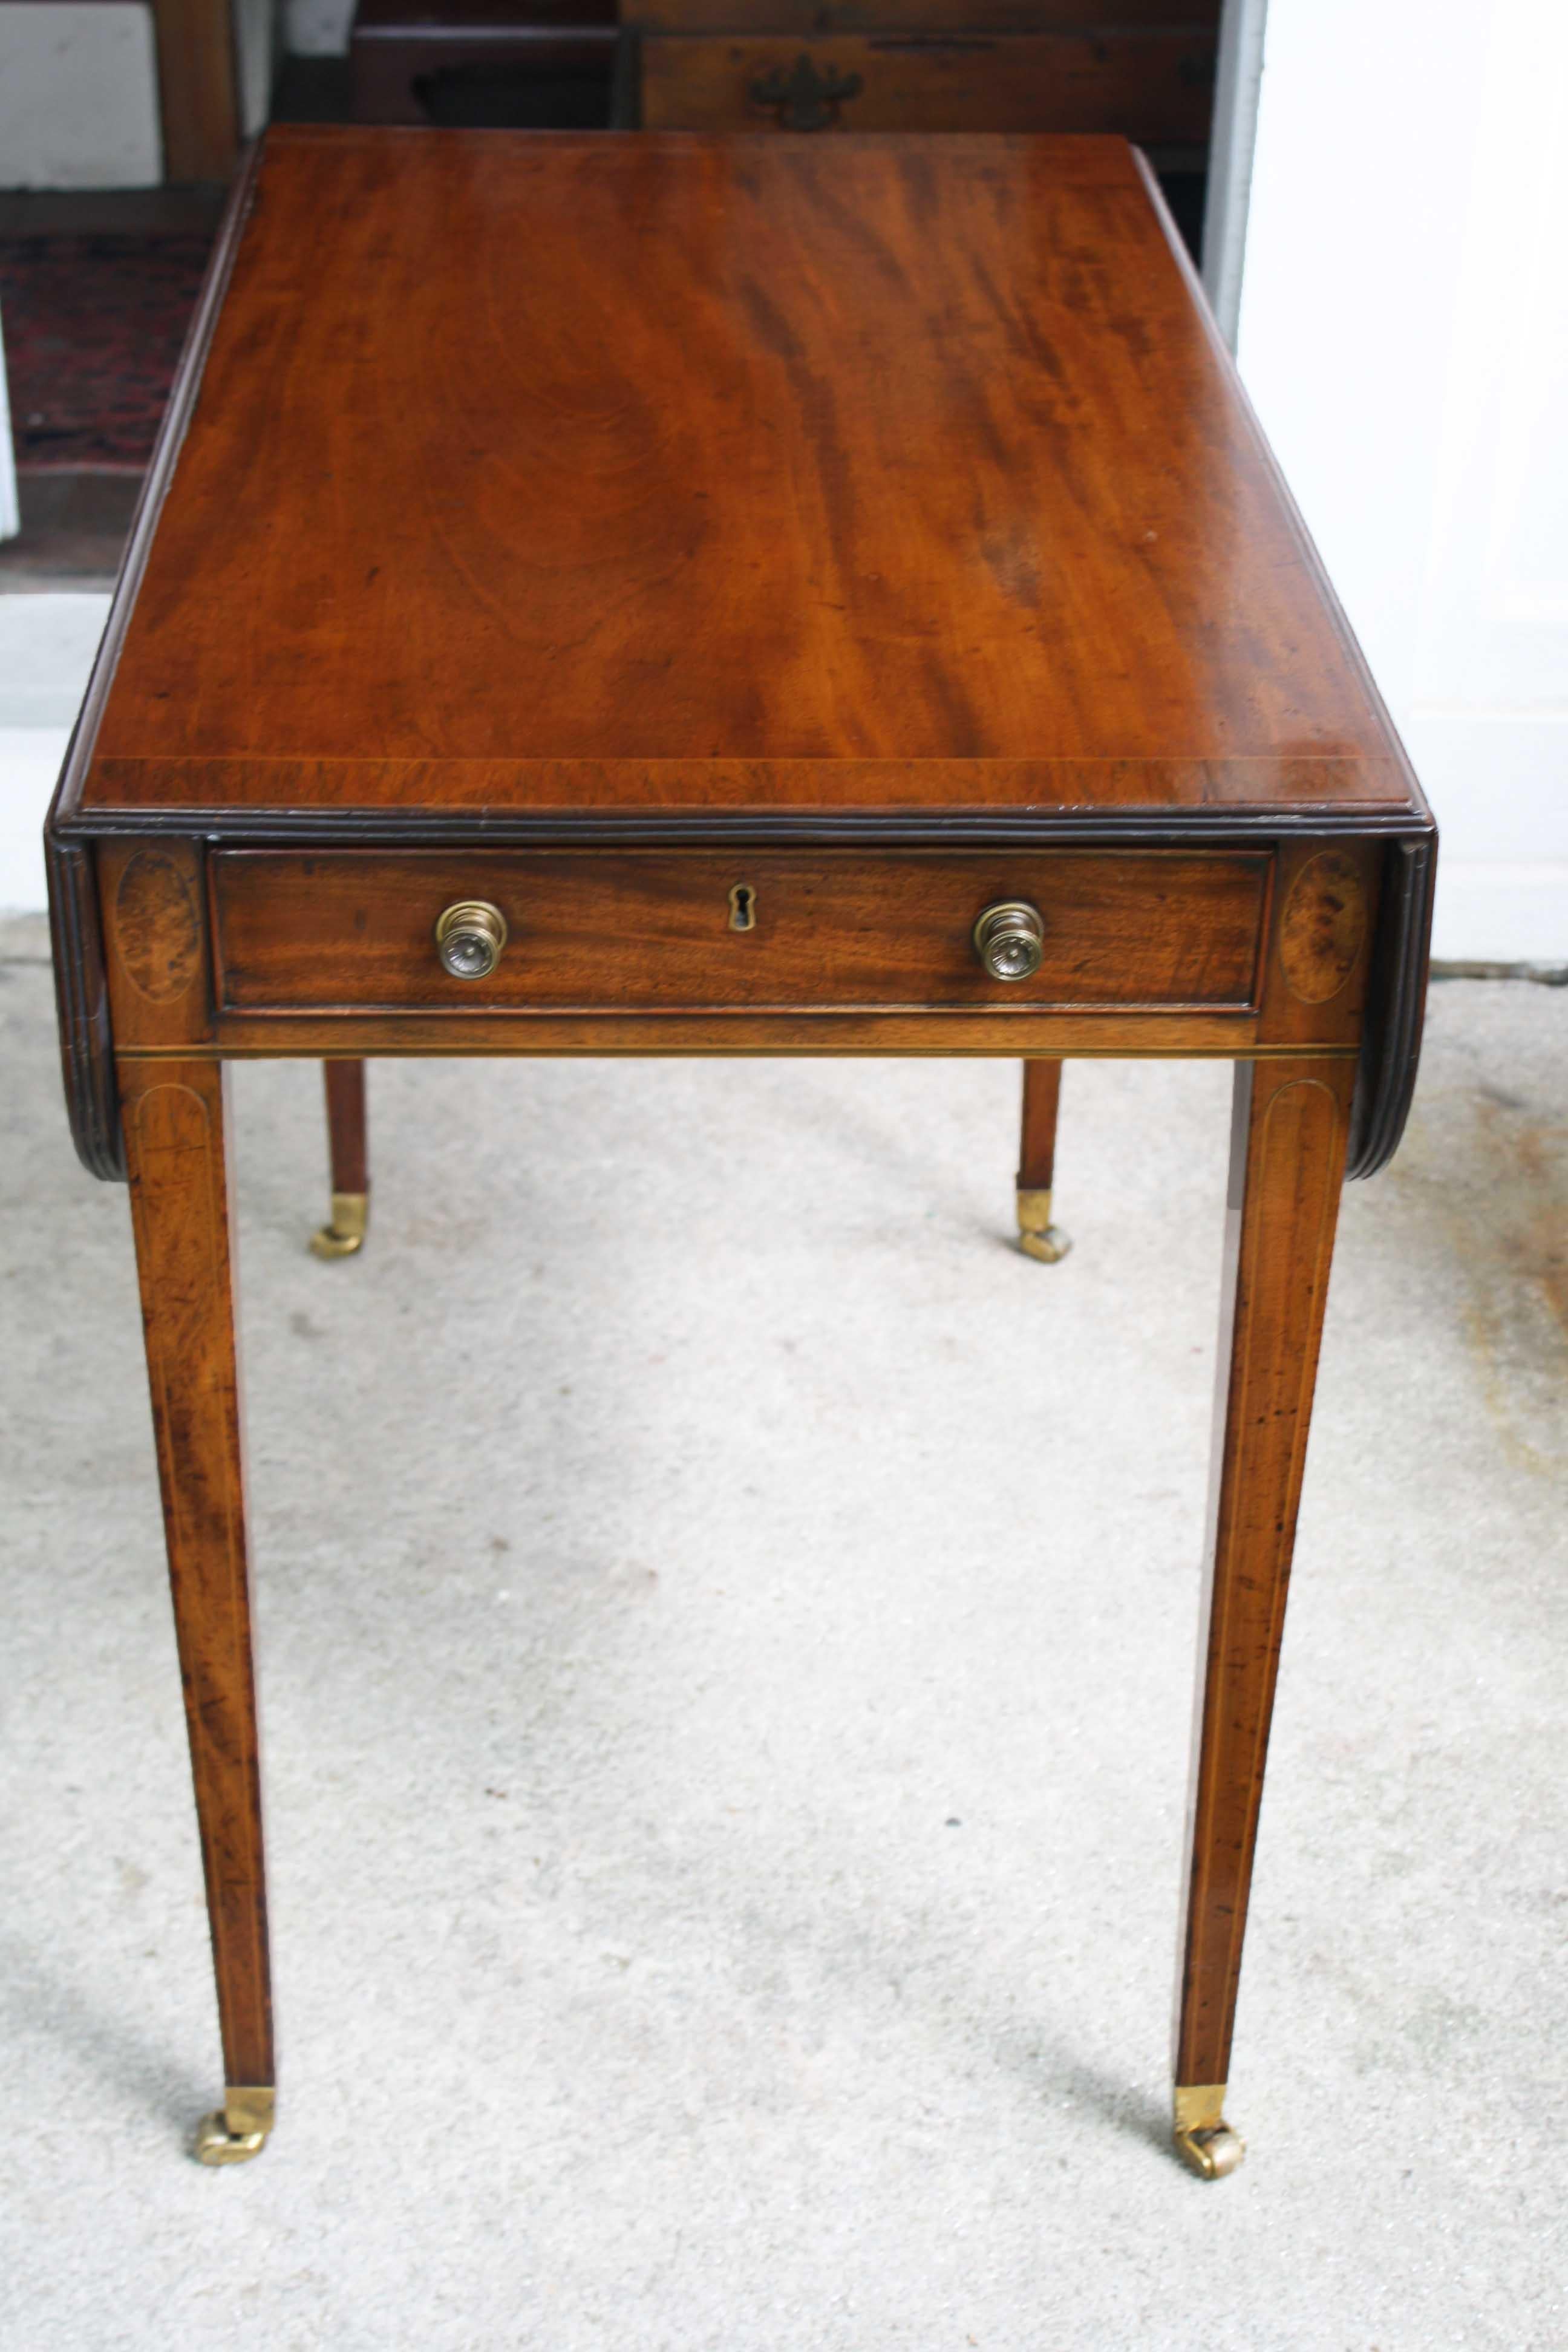 In the Hepplewhite manner, a fine line and ebony inlaid, rosewood banded drop-leaf Pembroke table. Both its functional and faux drawer fronts are beaded and surrounded by elliptical inlays. Brass drawer pulls as well as leg cups and casters appear